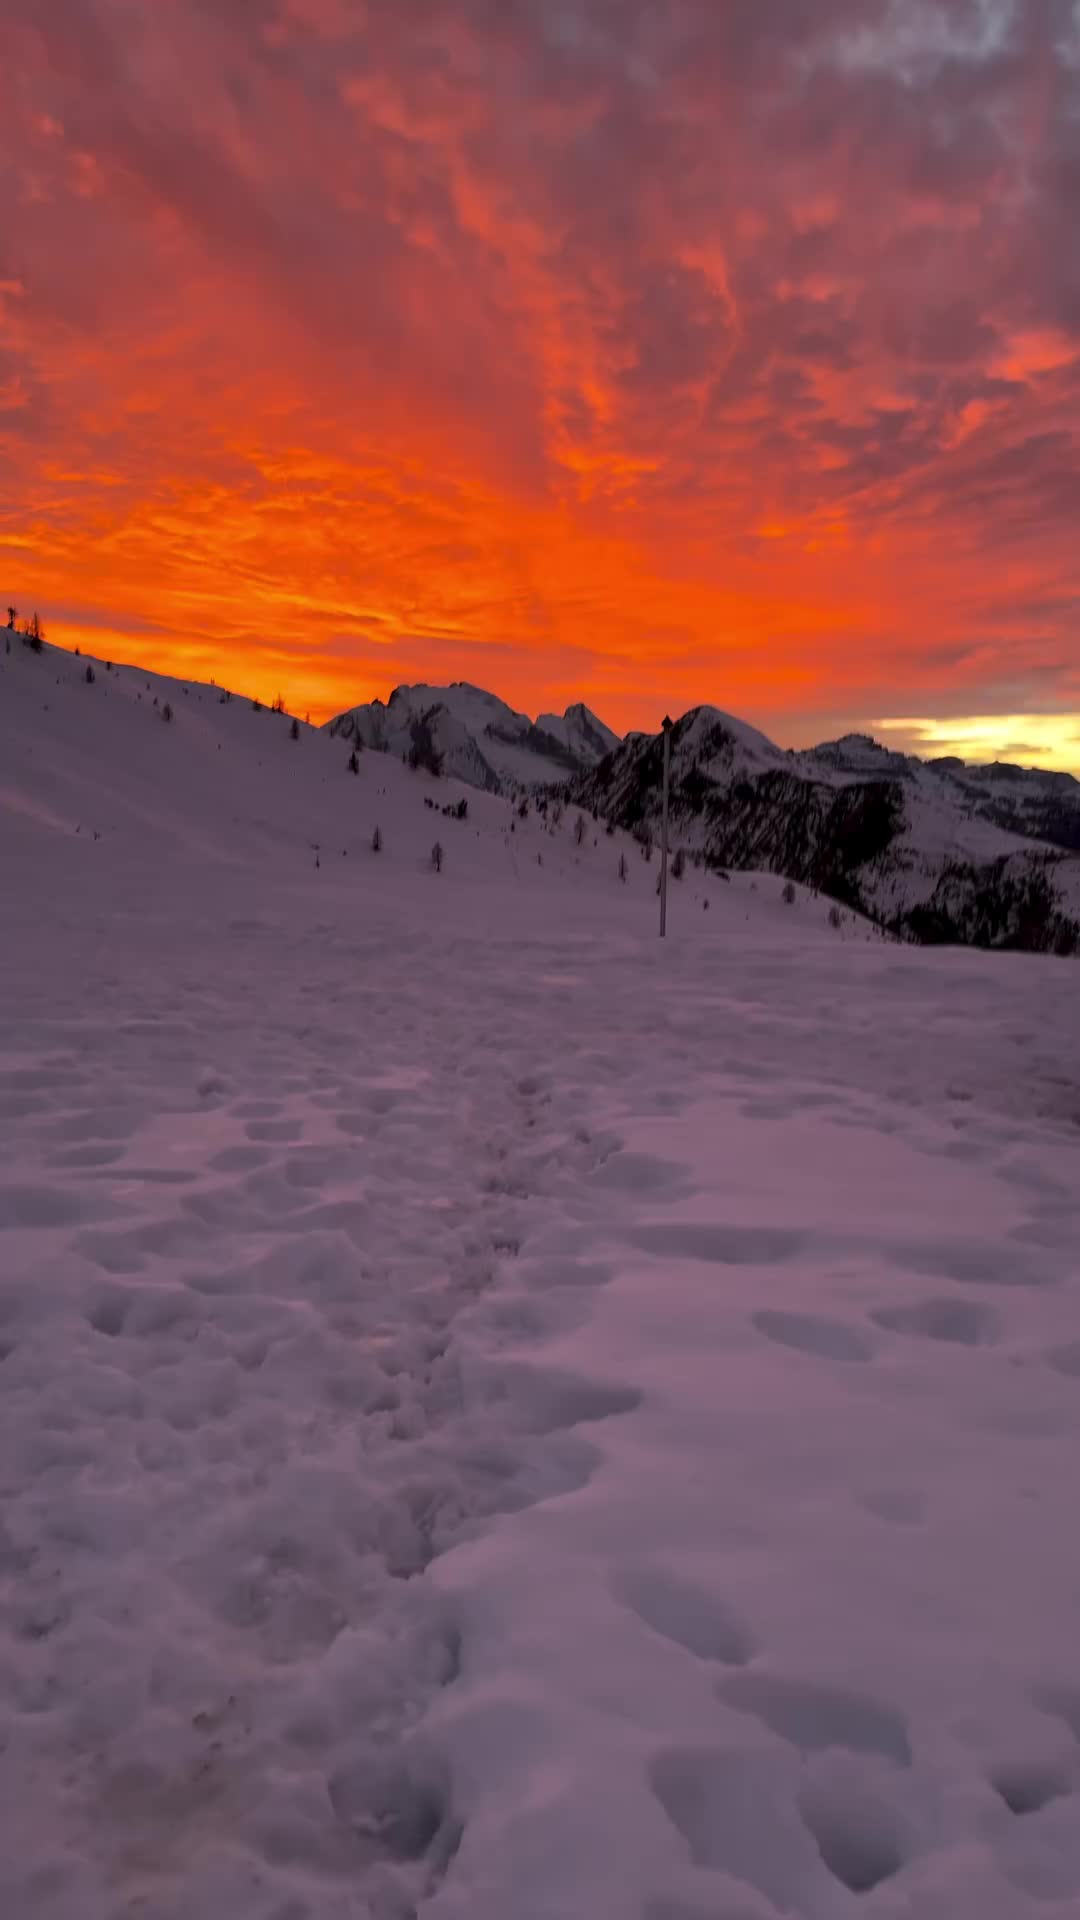 Sunset Over Snowy Dolomites in Italy